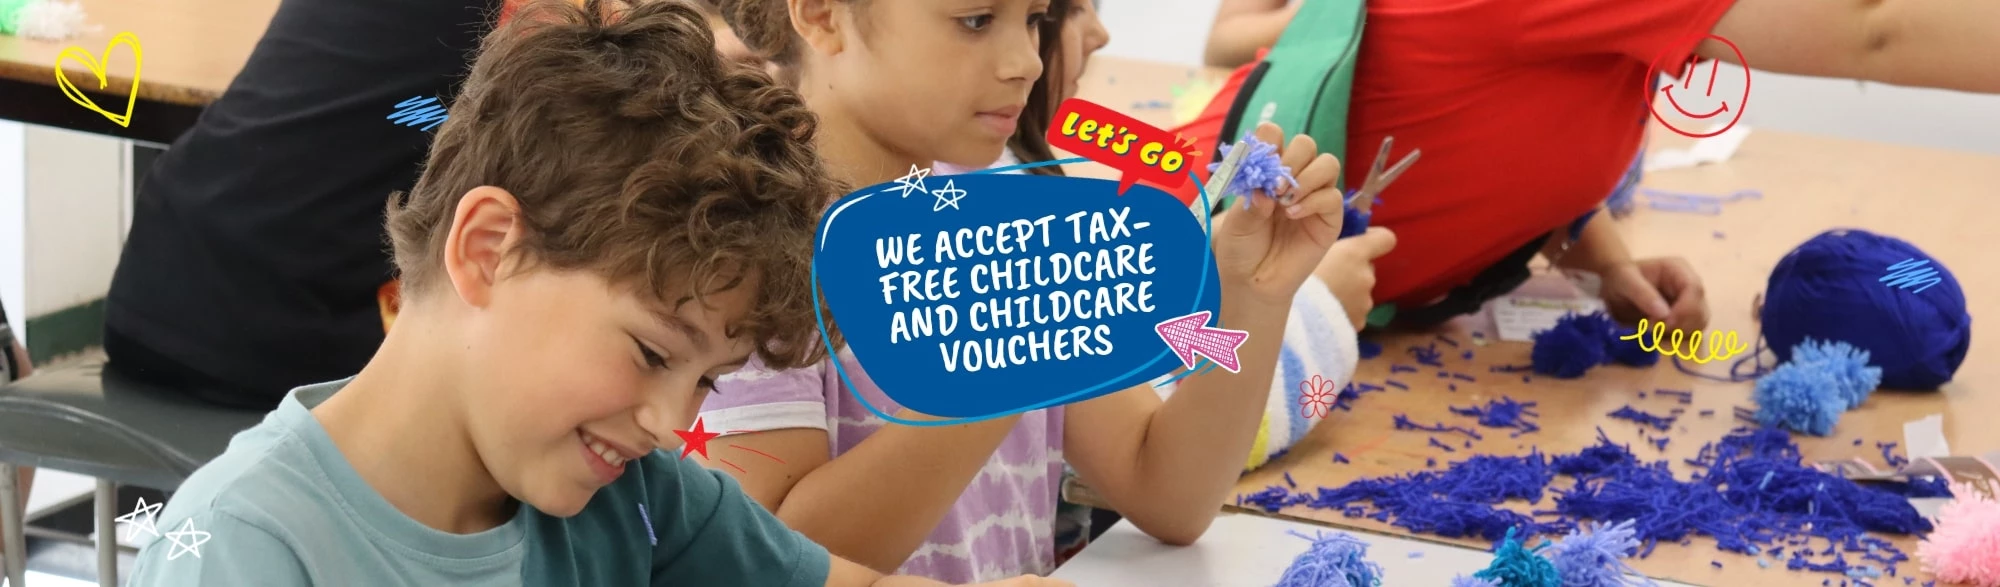 School holiday activities using Tax-Free childcare or Childcare Vouchers